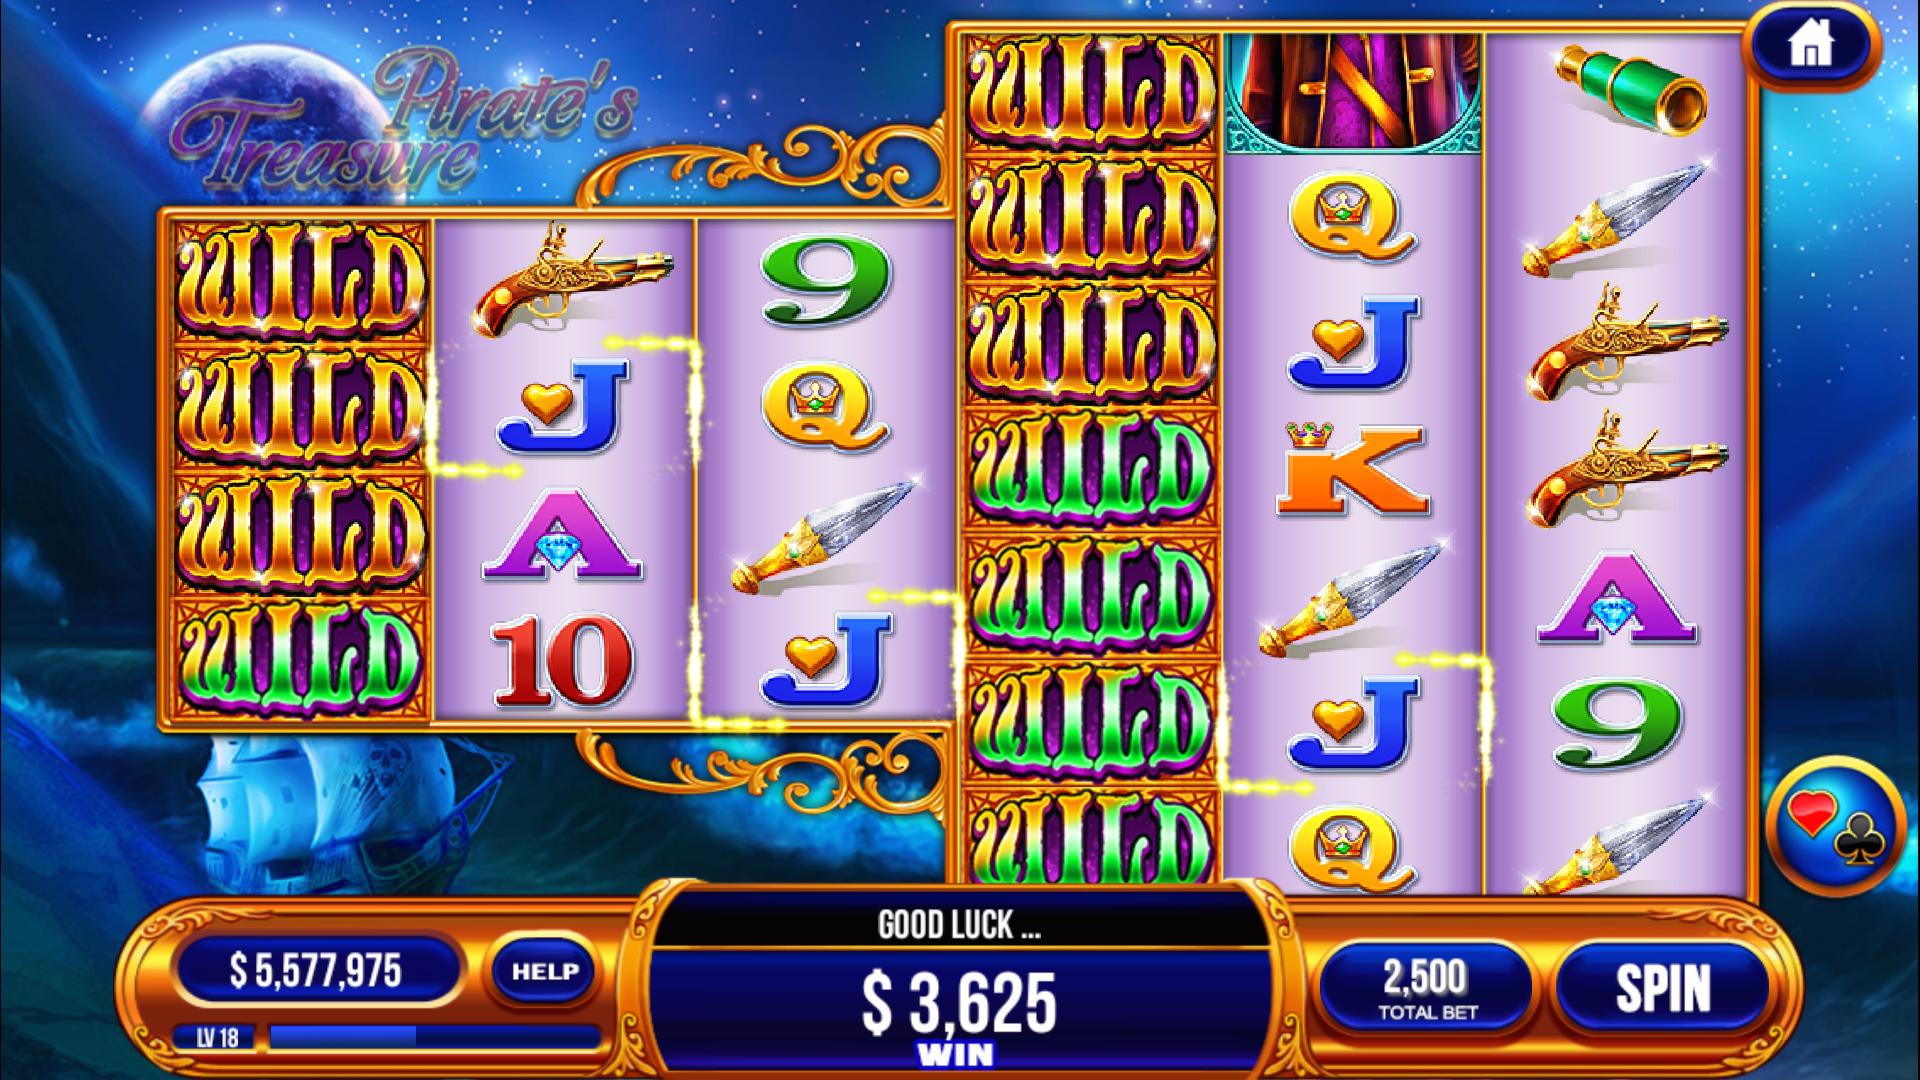 Lucky real casino lucky real casino space. Казино Lucky Fish. Android Goldmine Slots. Gold mine Slot. Казино Lucky Koi Лион.